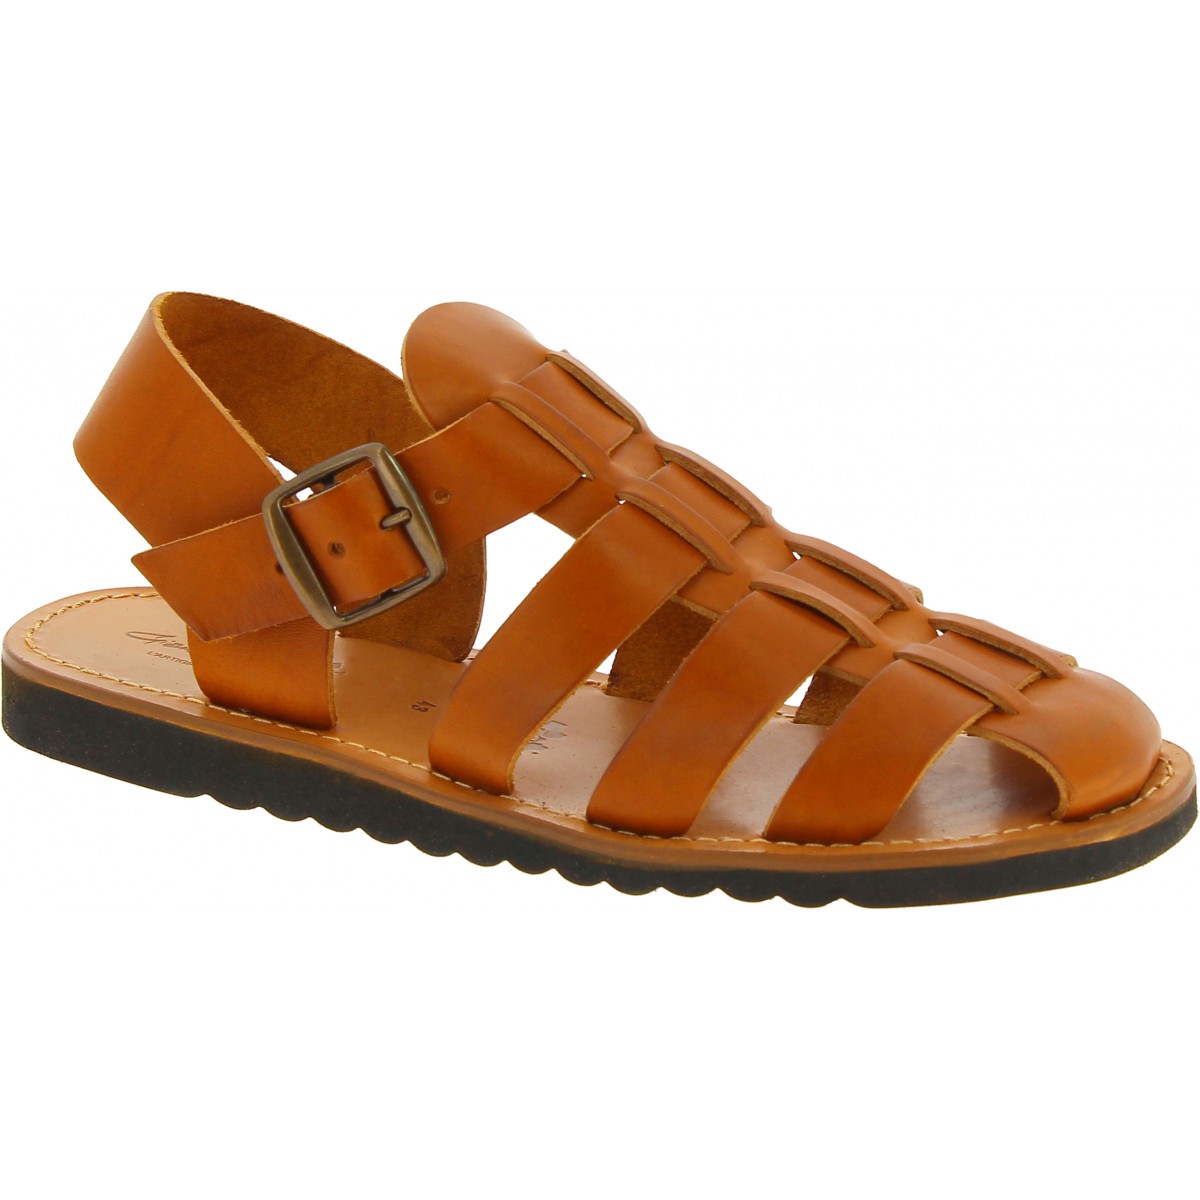 Handmade in Italy men's fisherman sandals in tan leather | The leather  craftsmen